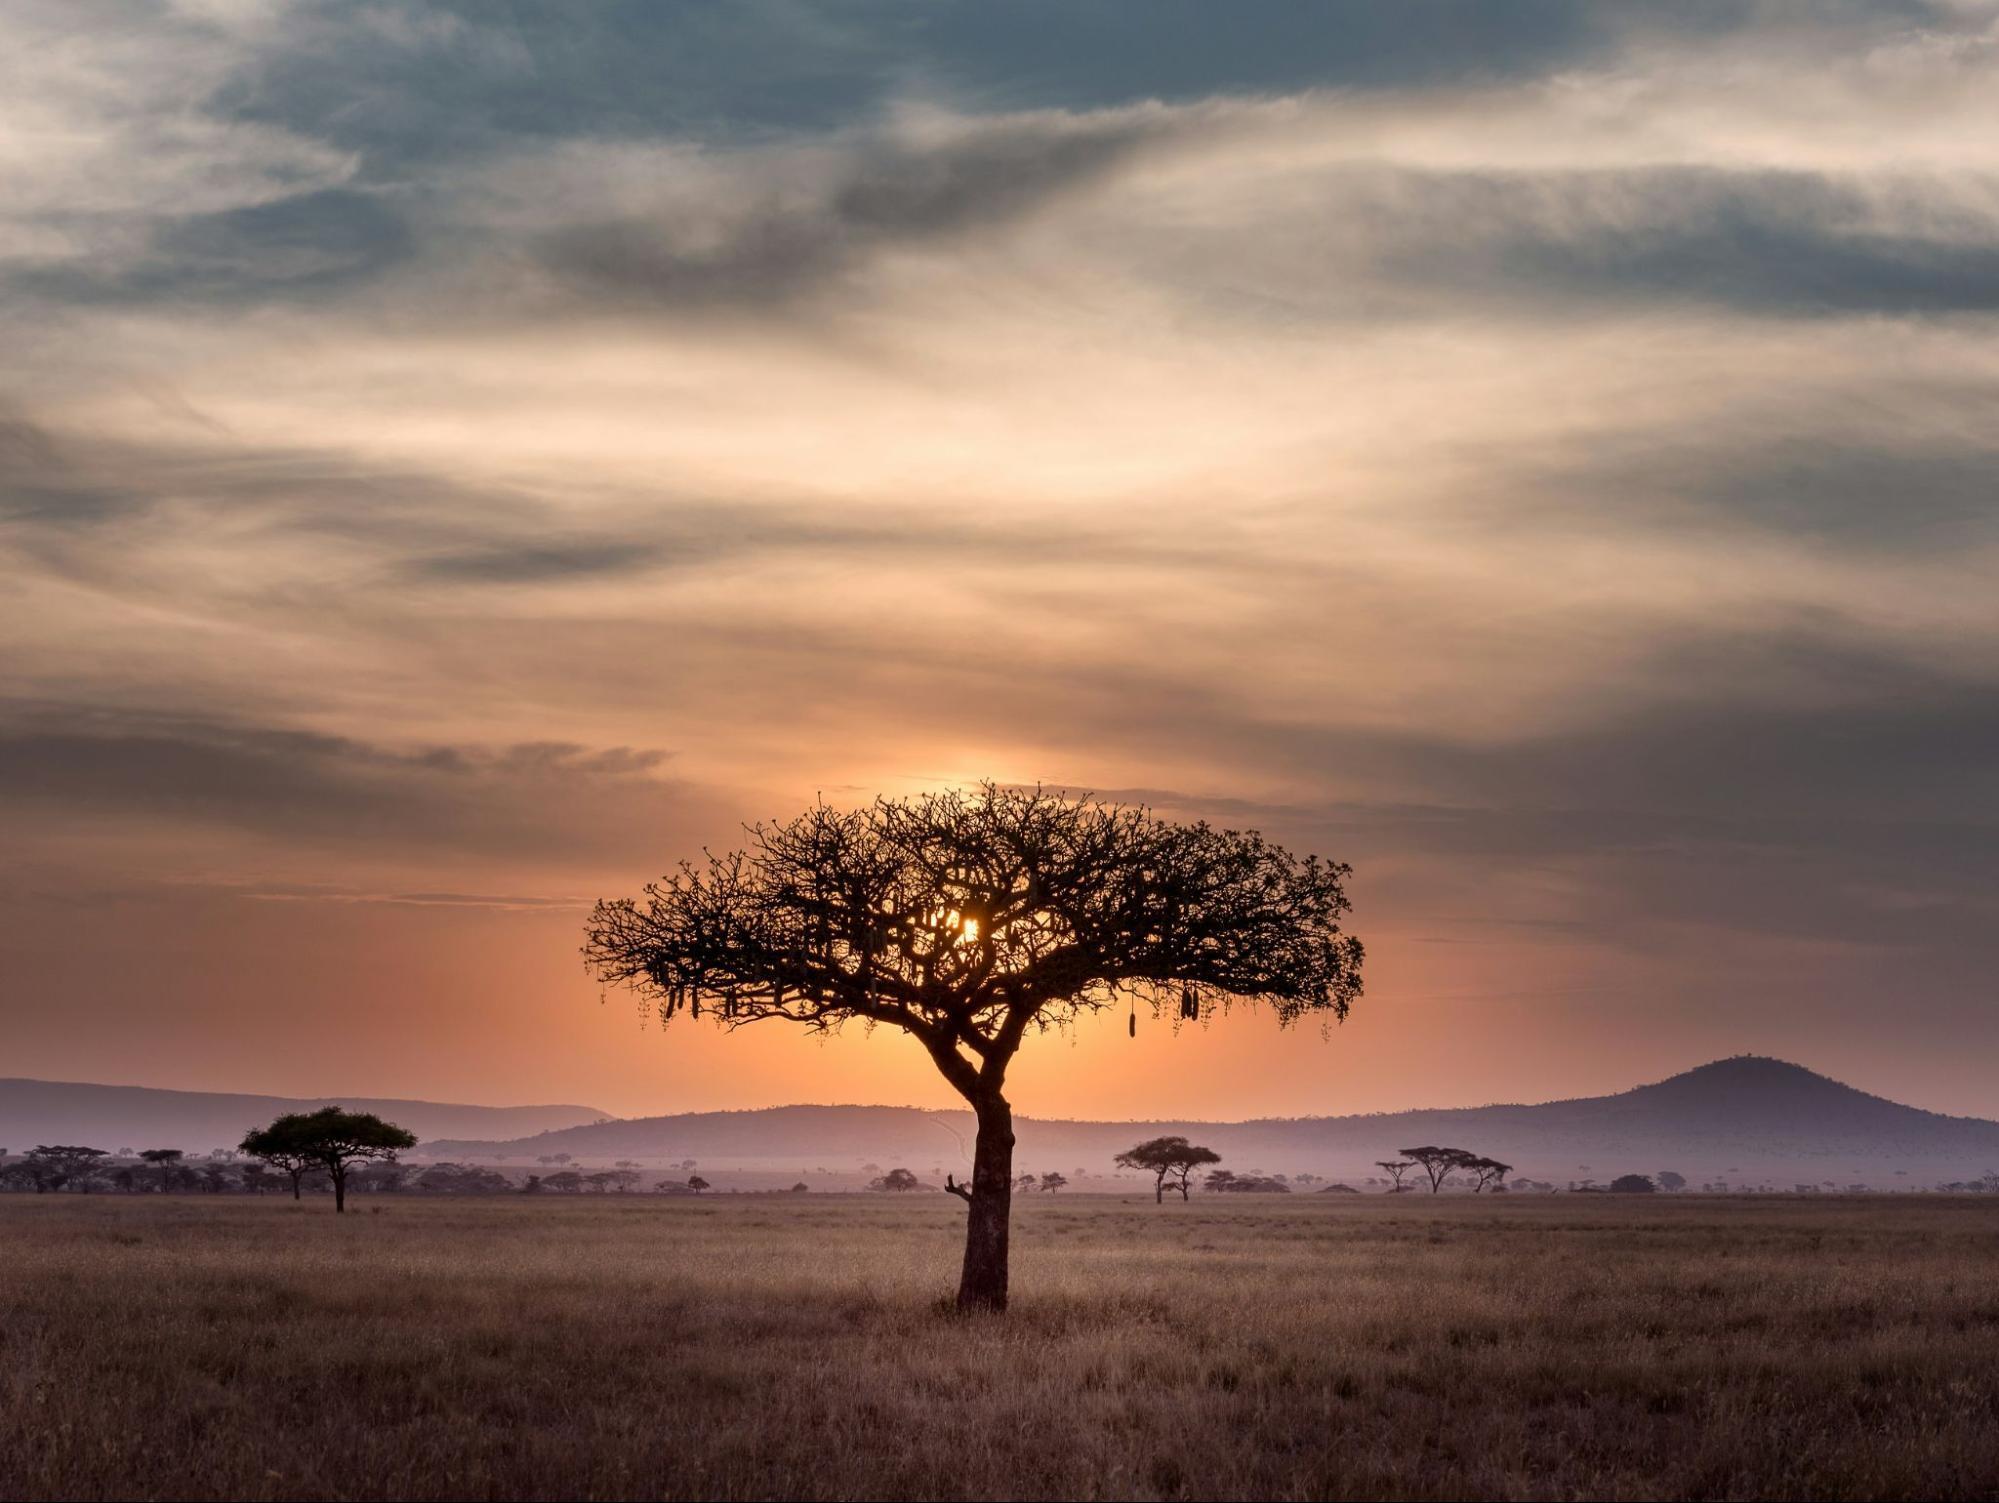 The tree on sunrise in Africa